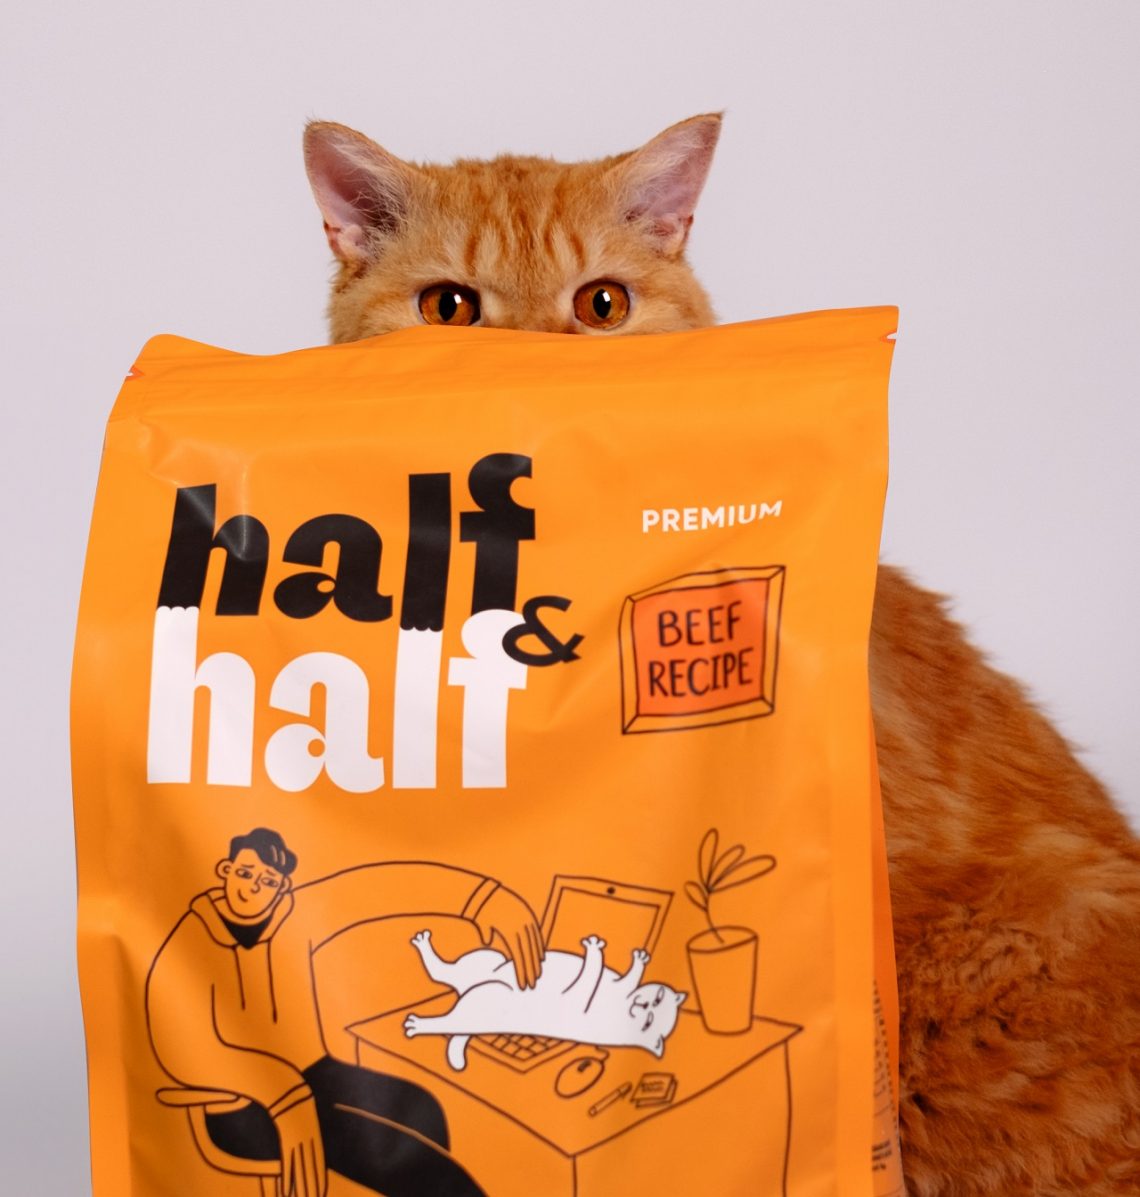 Positioning and design for Half&Half